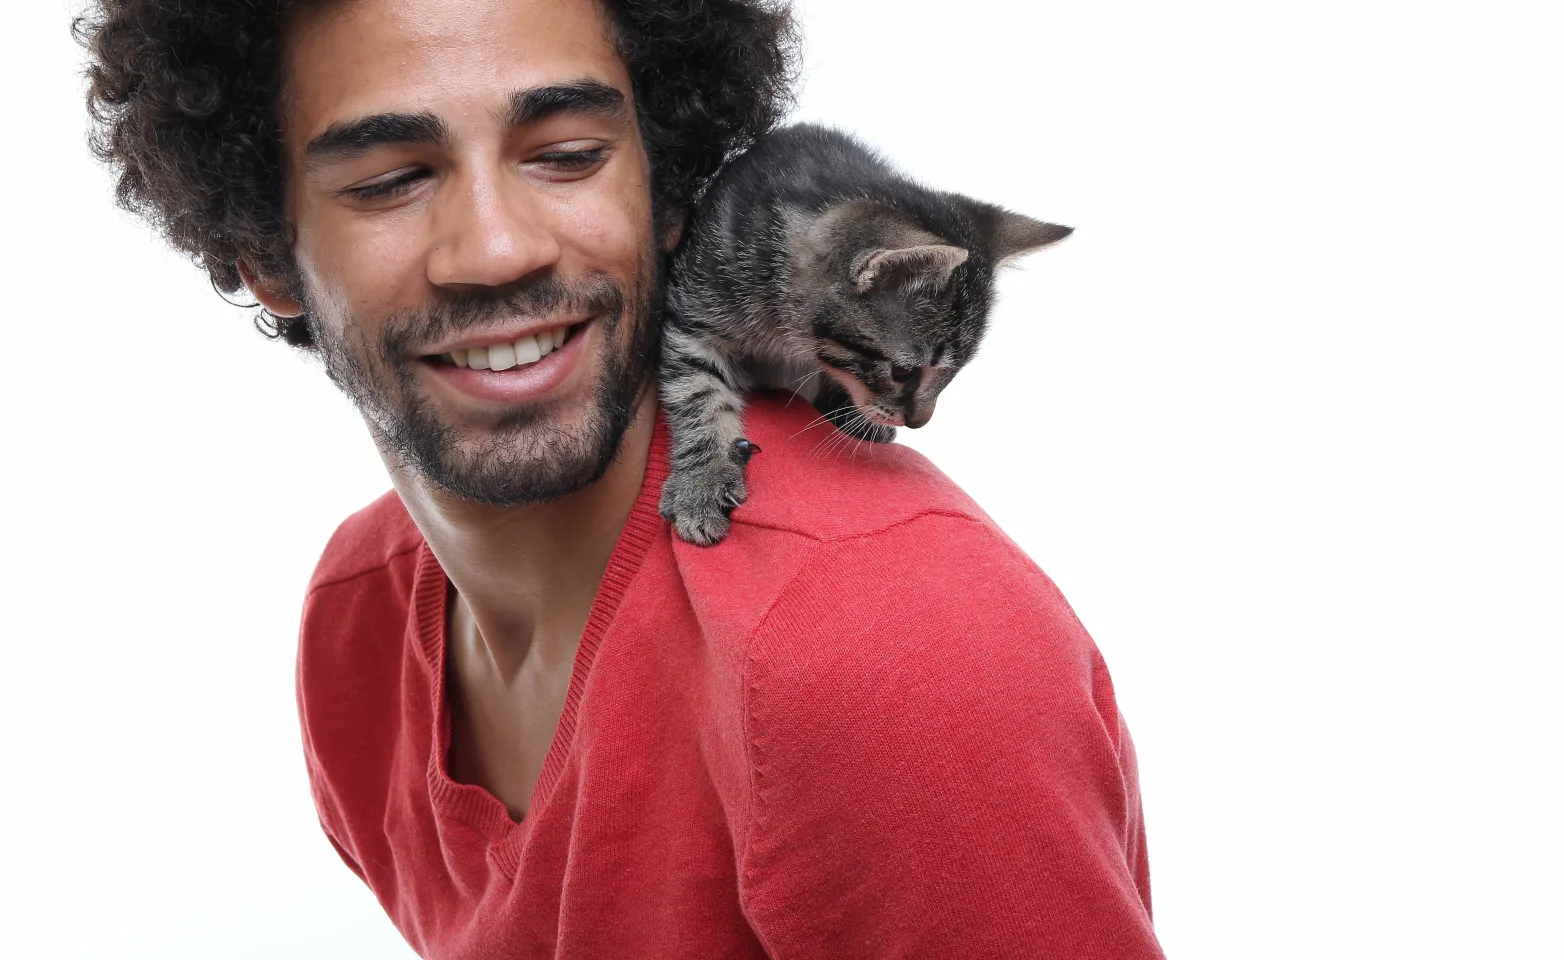 Man Red Sweater with Cat 